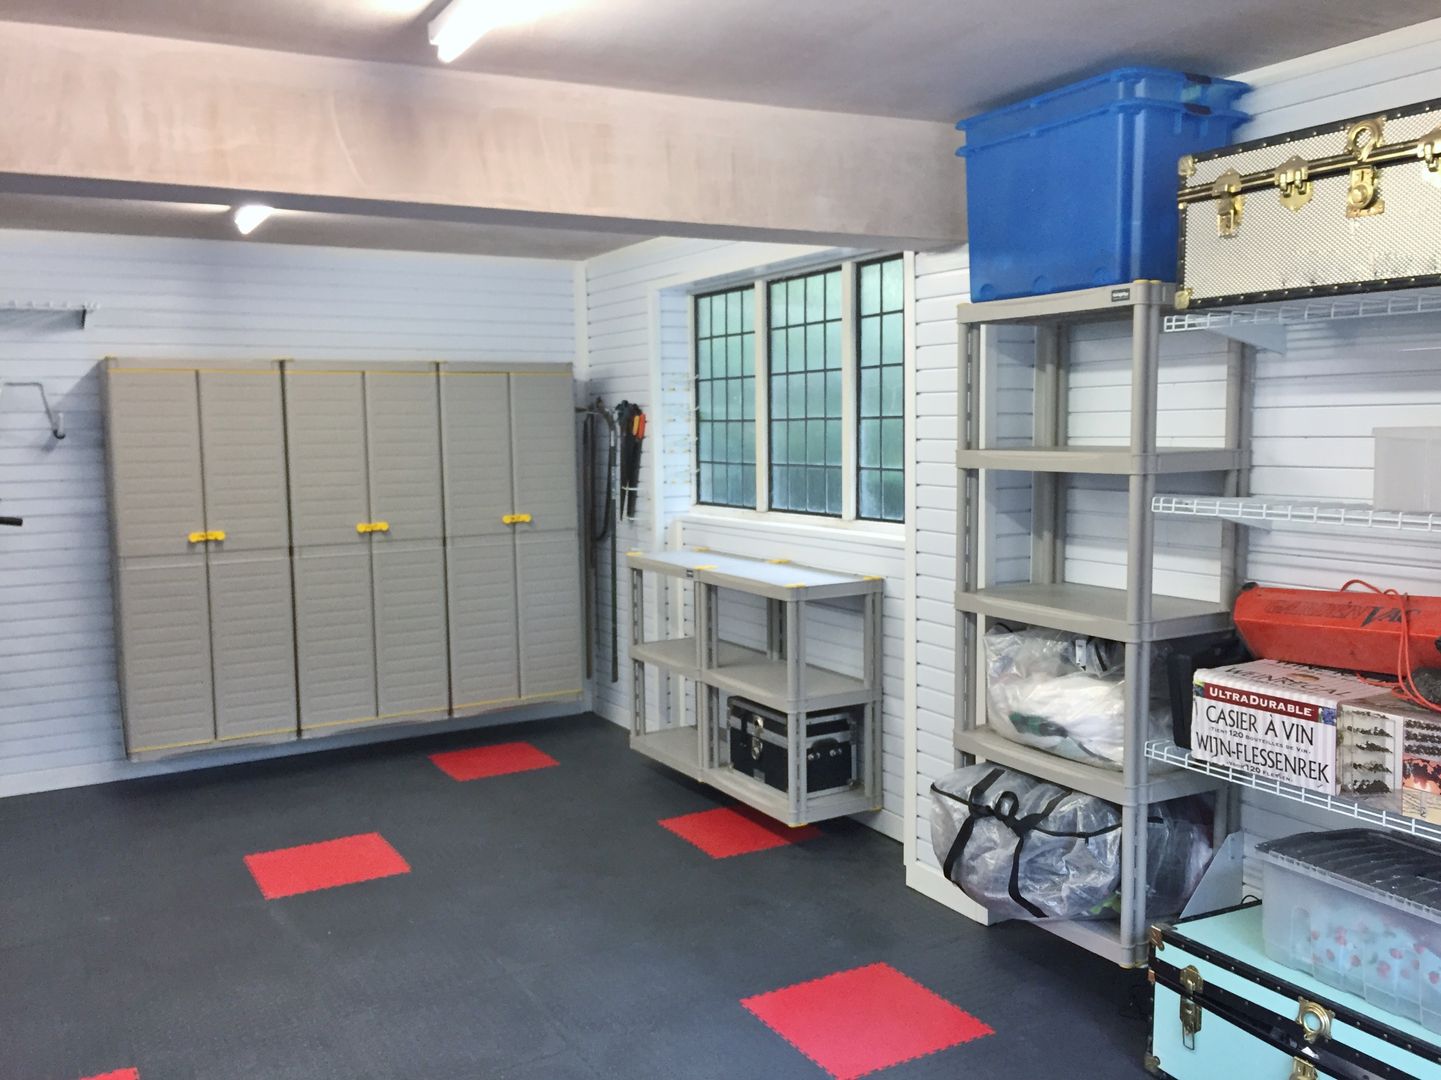 Great Storage Solutions and a Striking Tiled Floor in Little Chalfont, Buckinghamshire Garageflex Modern Garage and Shed garage,buckinghamshire,chalfont,garage storage,garageflex,wall solutions,fitted garage,uk,shelving,cupboards,floor tiles